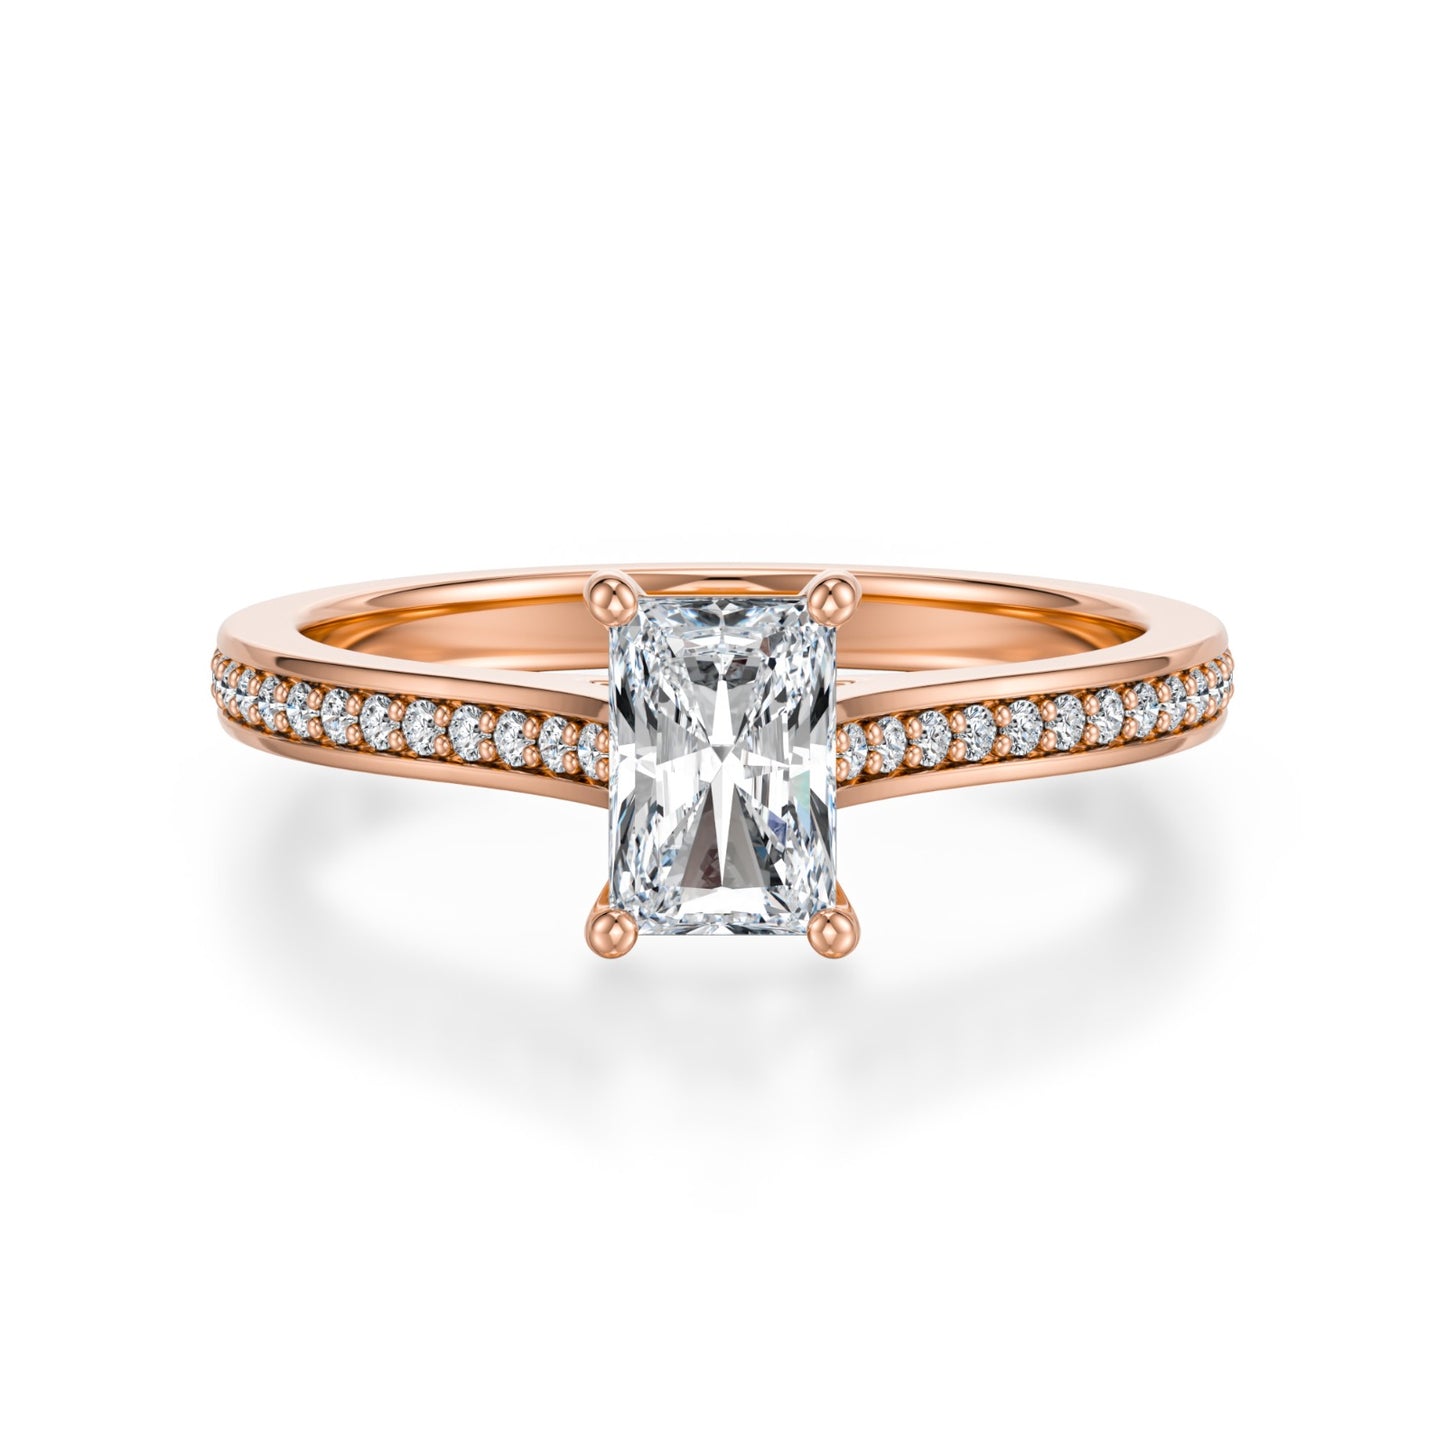 Radiant Pave Diamond ring in Rose Gold